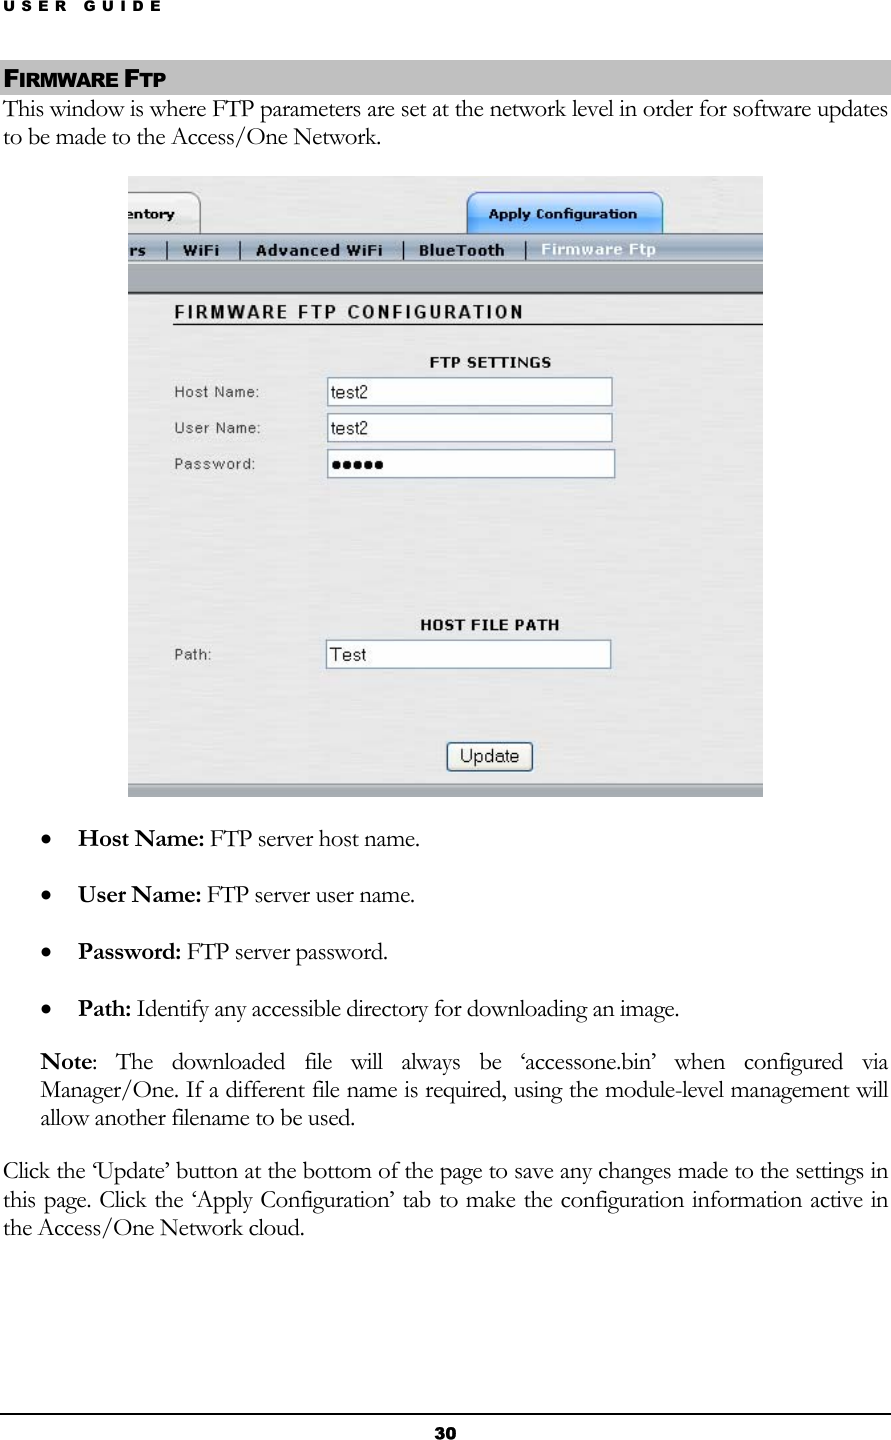 USER GUIDE FIRMWARE FTP This window is where FTP parameters are set at the network level in order for software updates to be made to the Access/One Network.  • Host Name: FTP server host name. • User Name: FTP server user name. • Password: FTP server password. • Path: Identify any accessible directory for downloading an image. Note: The downloaded file will always be ‘accessone.bin’ when configured via Manager/One. If a different file name is required, using the module-level management will allow another filename to be used. Click the ‘Update’ button at the bottom of the page to save any changes made to the settings in this page. Click the ‘Apply Configuration’ tab to make the configuration information active in the Access/One Network cloud. 30 